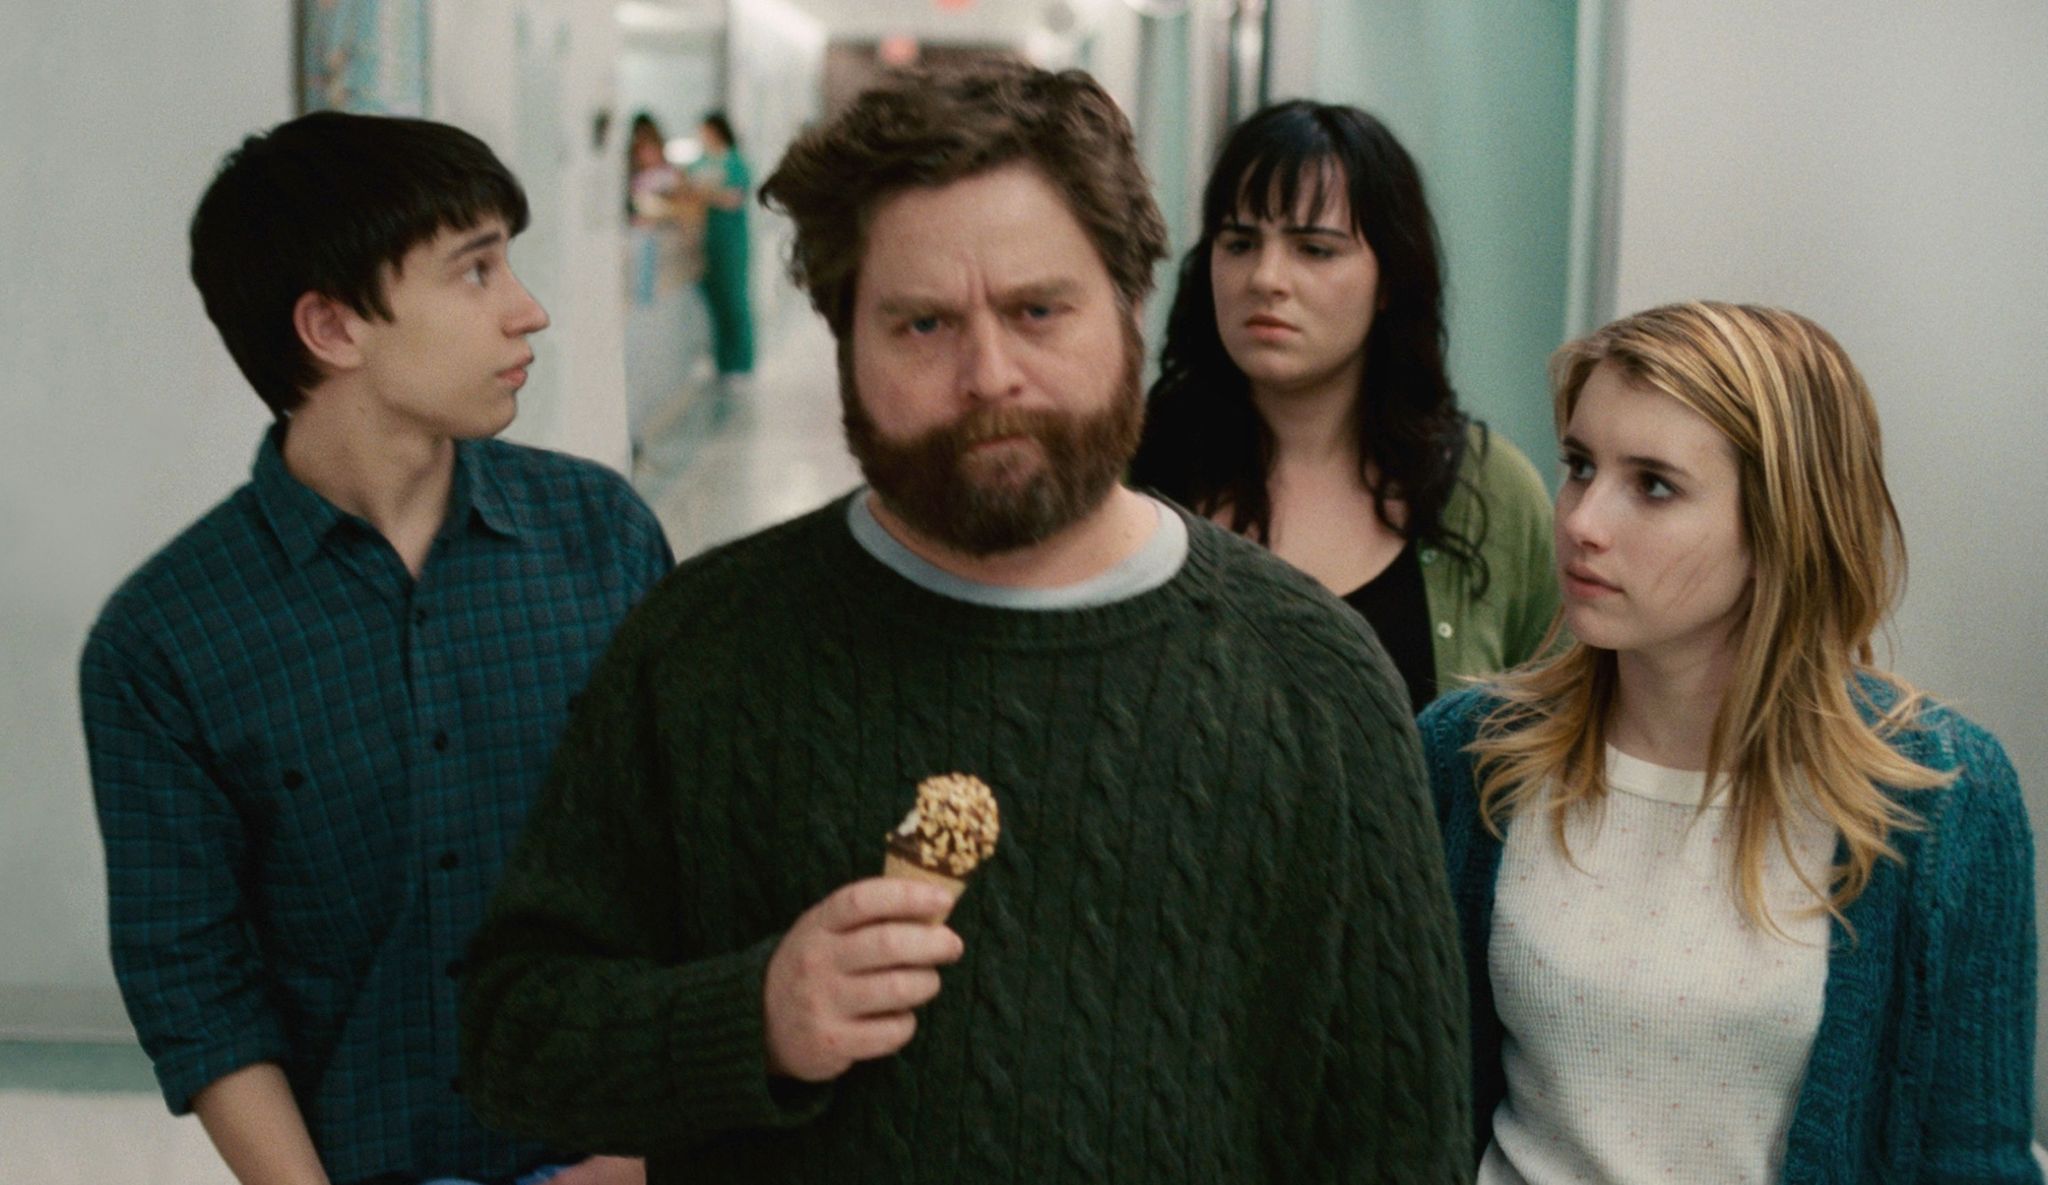 Zach Galifianakis mental health Sucide Funny It's Kind of a Funny Story 